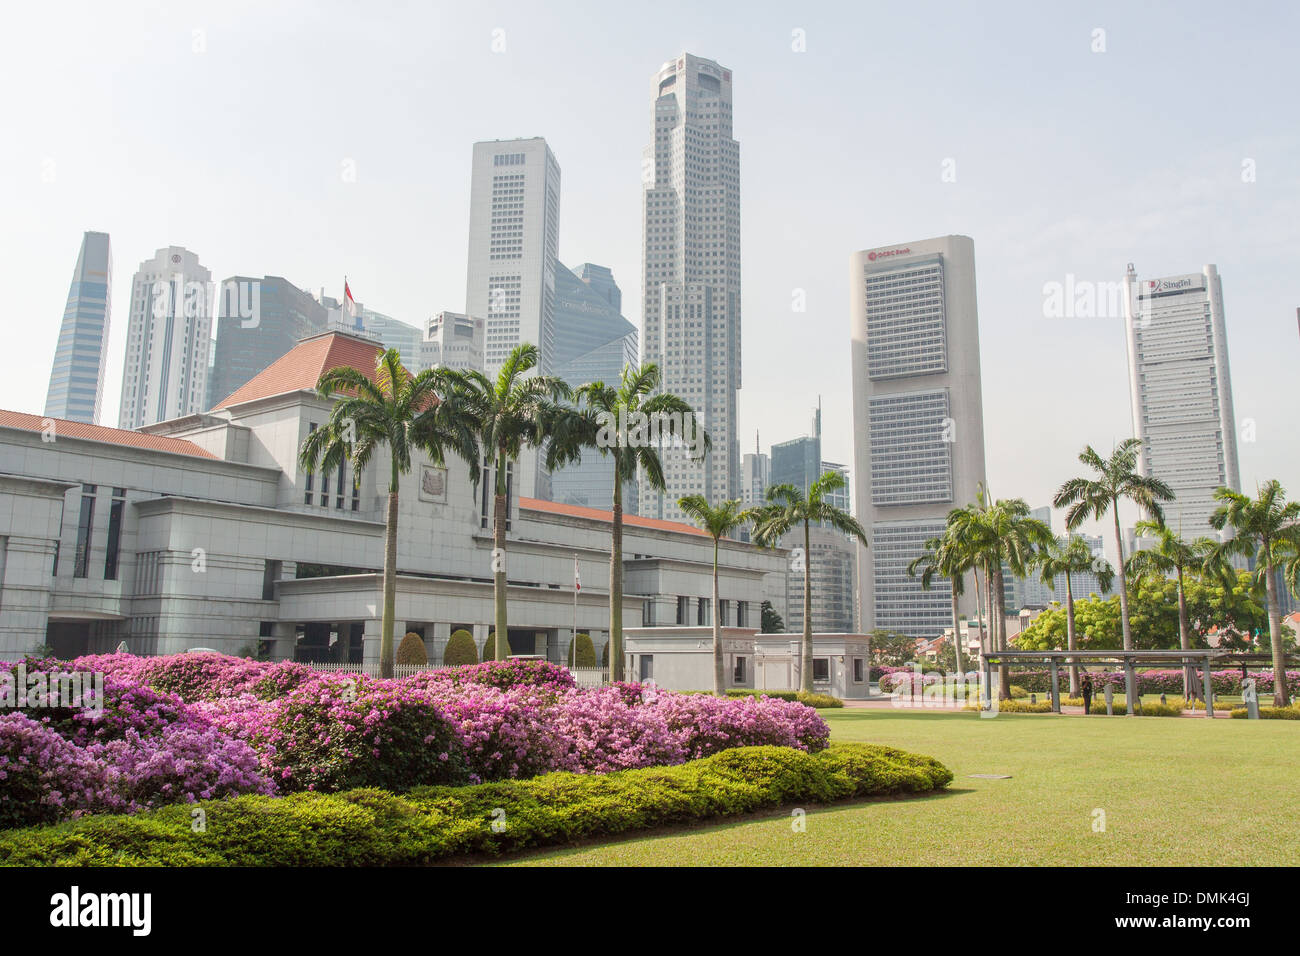 THE SINGAPORE PARLIAMENT WITH, IN THE BACKGROUND, THE OFFICE TOWERS OF THE FINANCIAL DISTRICT, THE CENTRAL BUSINESS DISTRICT, HERITAGE DISTRICT, SINGAPORE Stock Photo